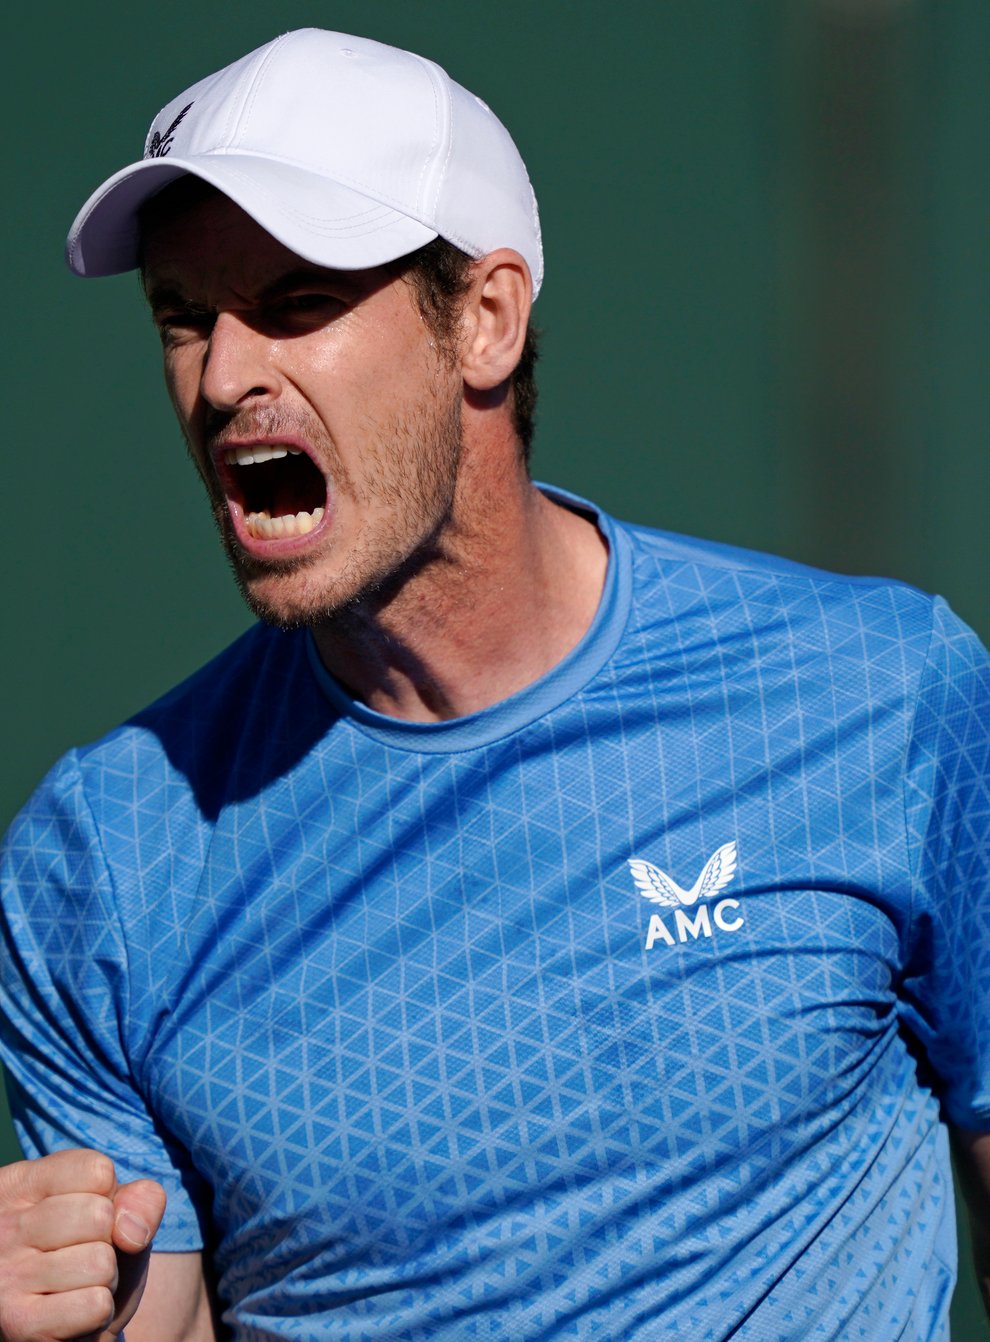 Andy Murray enjoyed a solid win on Monday (Mark J Terrill/AP)